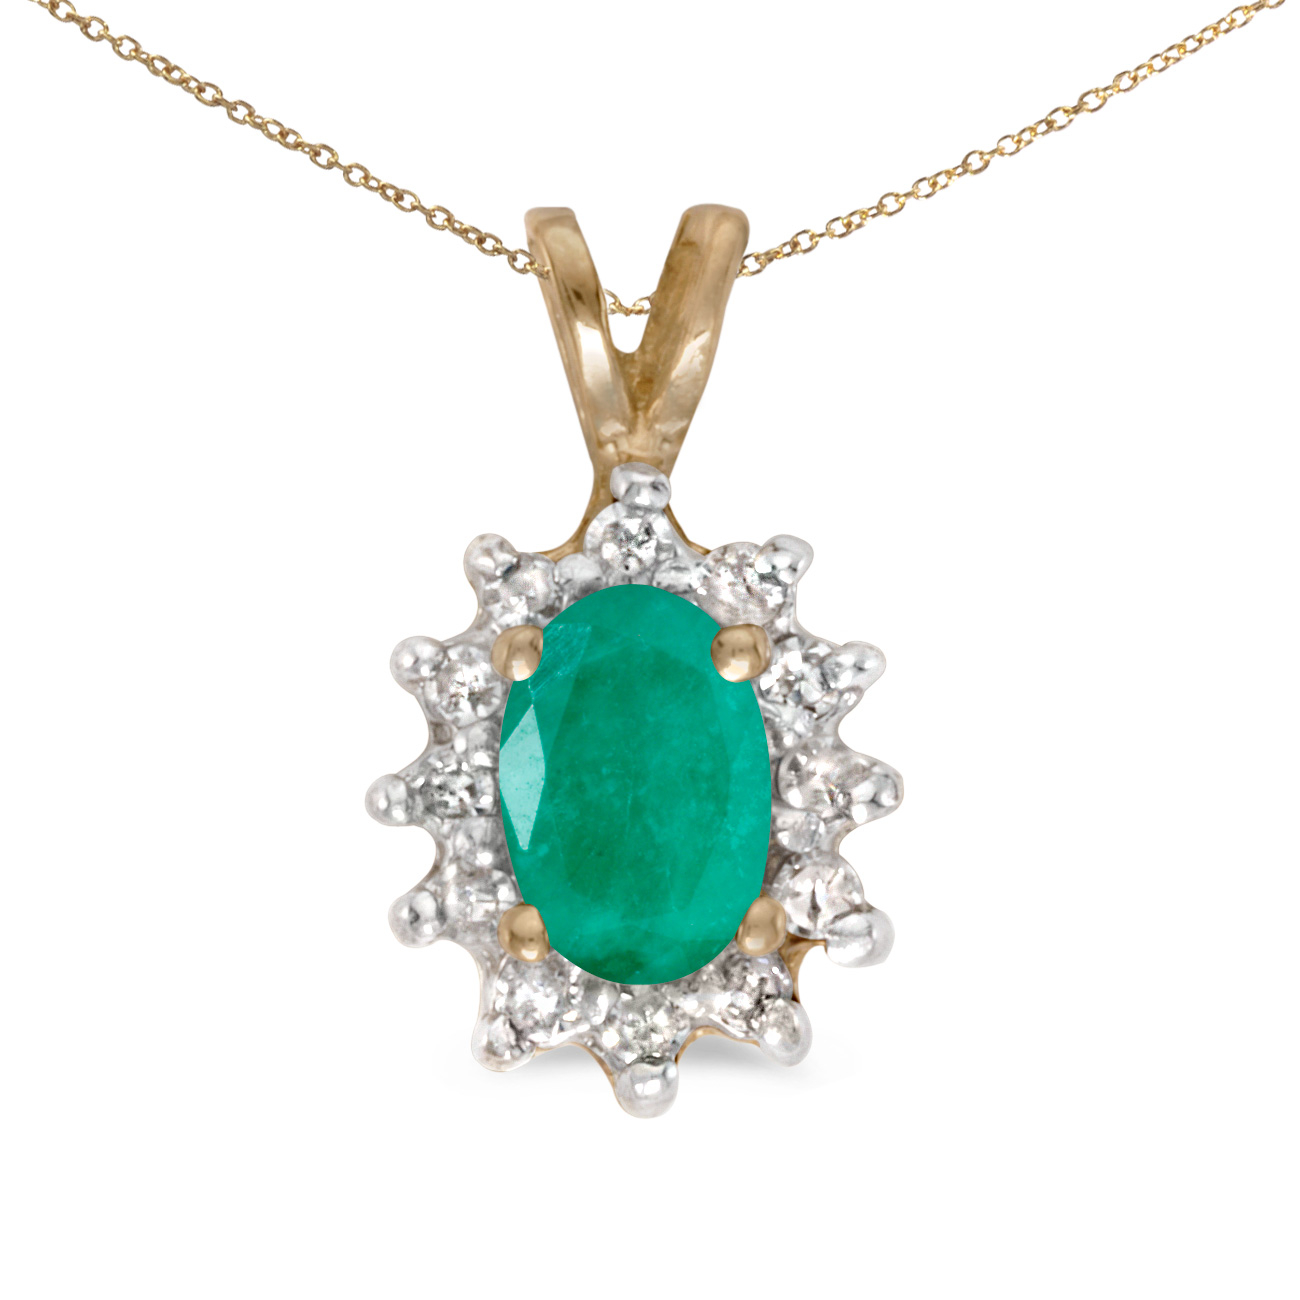 This 14k yellow gold oval emerald and diamond pendant features a 6x4 mm genuine natural emerald with a 0.31 ct total weight.